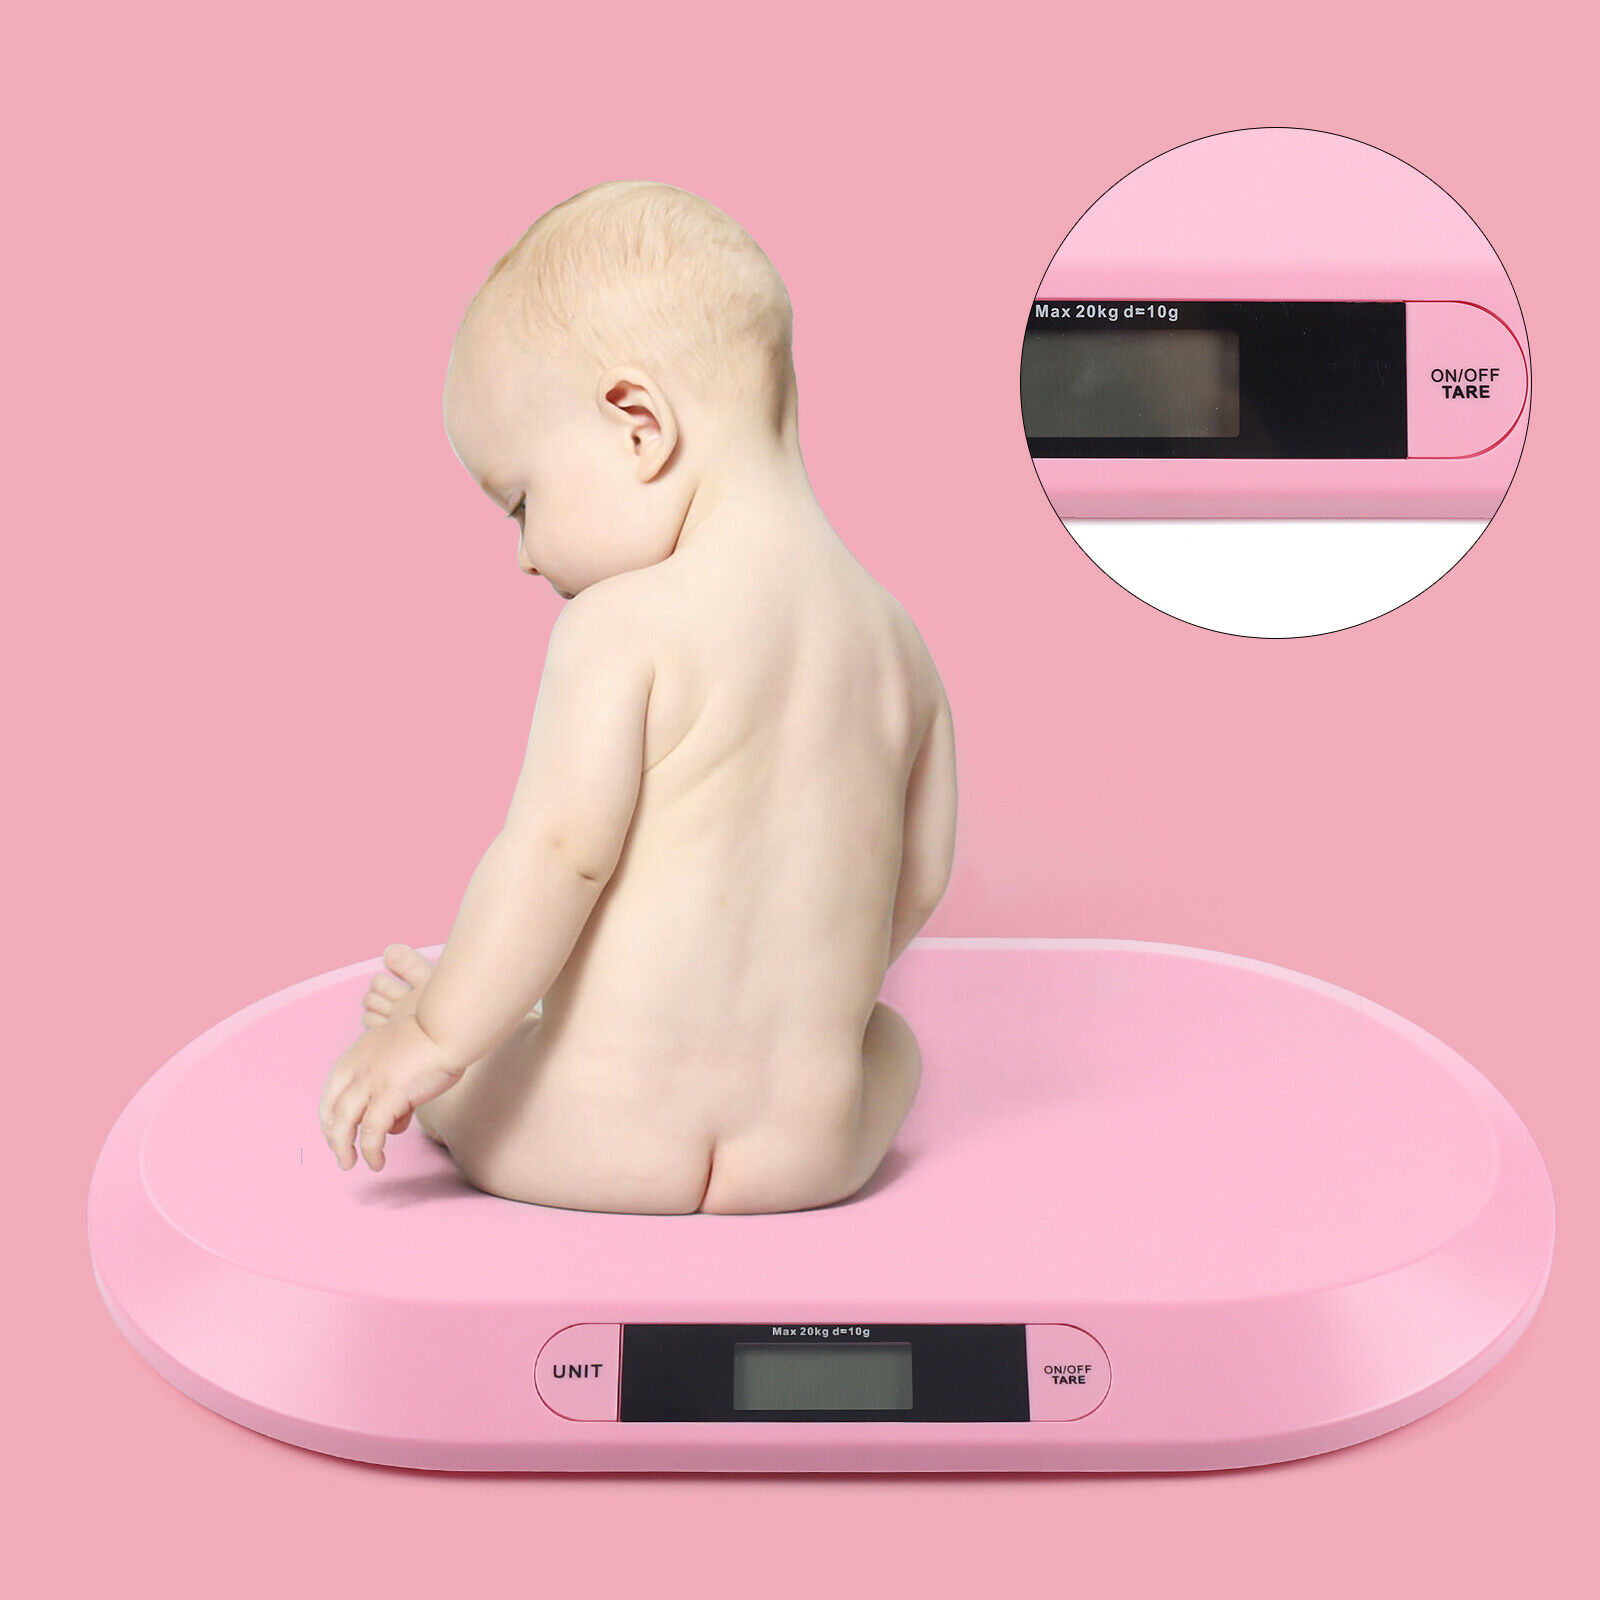 20kg Baby Infant Scale Digital Scale High Accuracy LCD Display Measures 44LBS